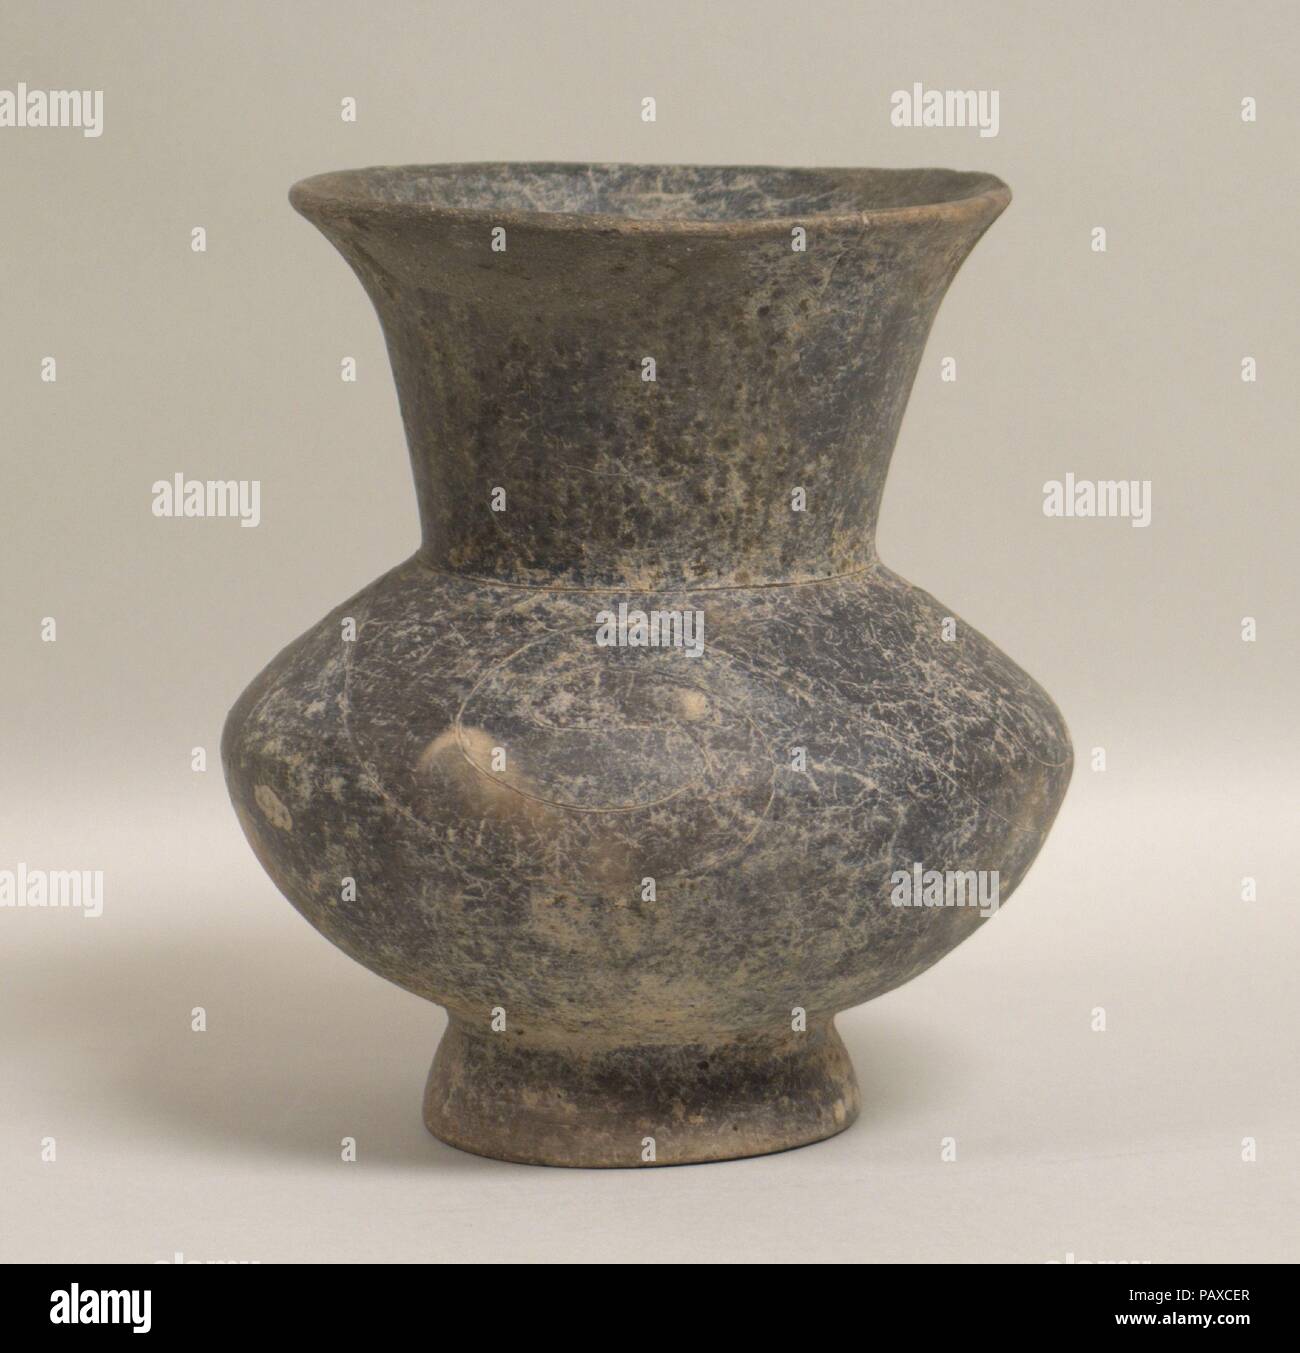 Footed Vessel. Culture: Thailand. Dimensions: H. 7 3/4 in. (19.7 cm); W. 6 1/4 in. (15.9 cm). Date: ca. 2500-1000 B.C.. Museum: Metropolitan Museum of Art, New York, USA. Stock Photo